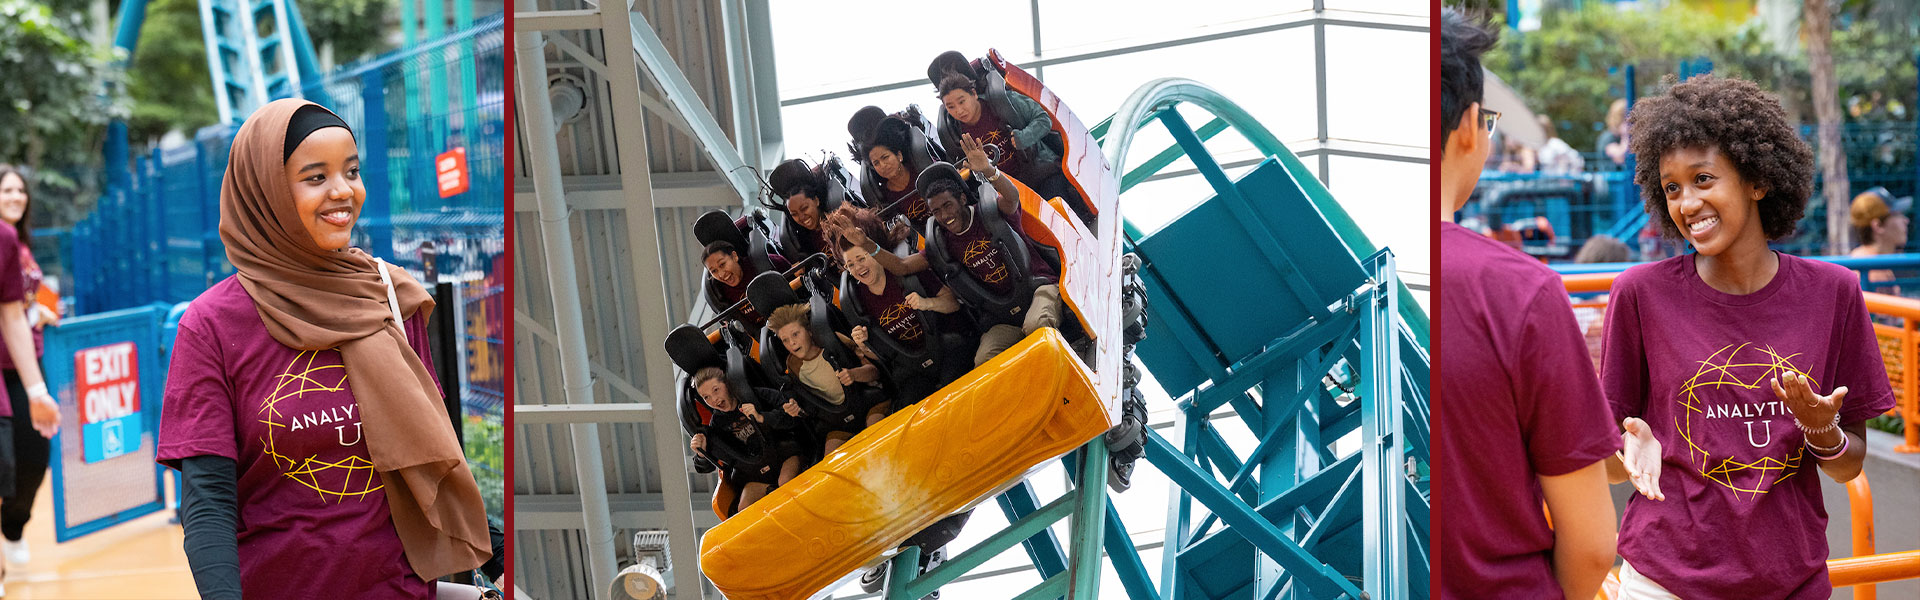 Analytics U students riding a ride at the Mall of America